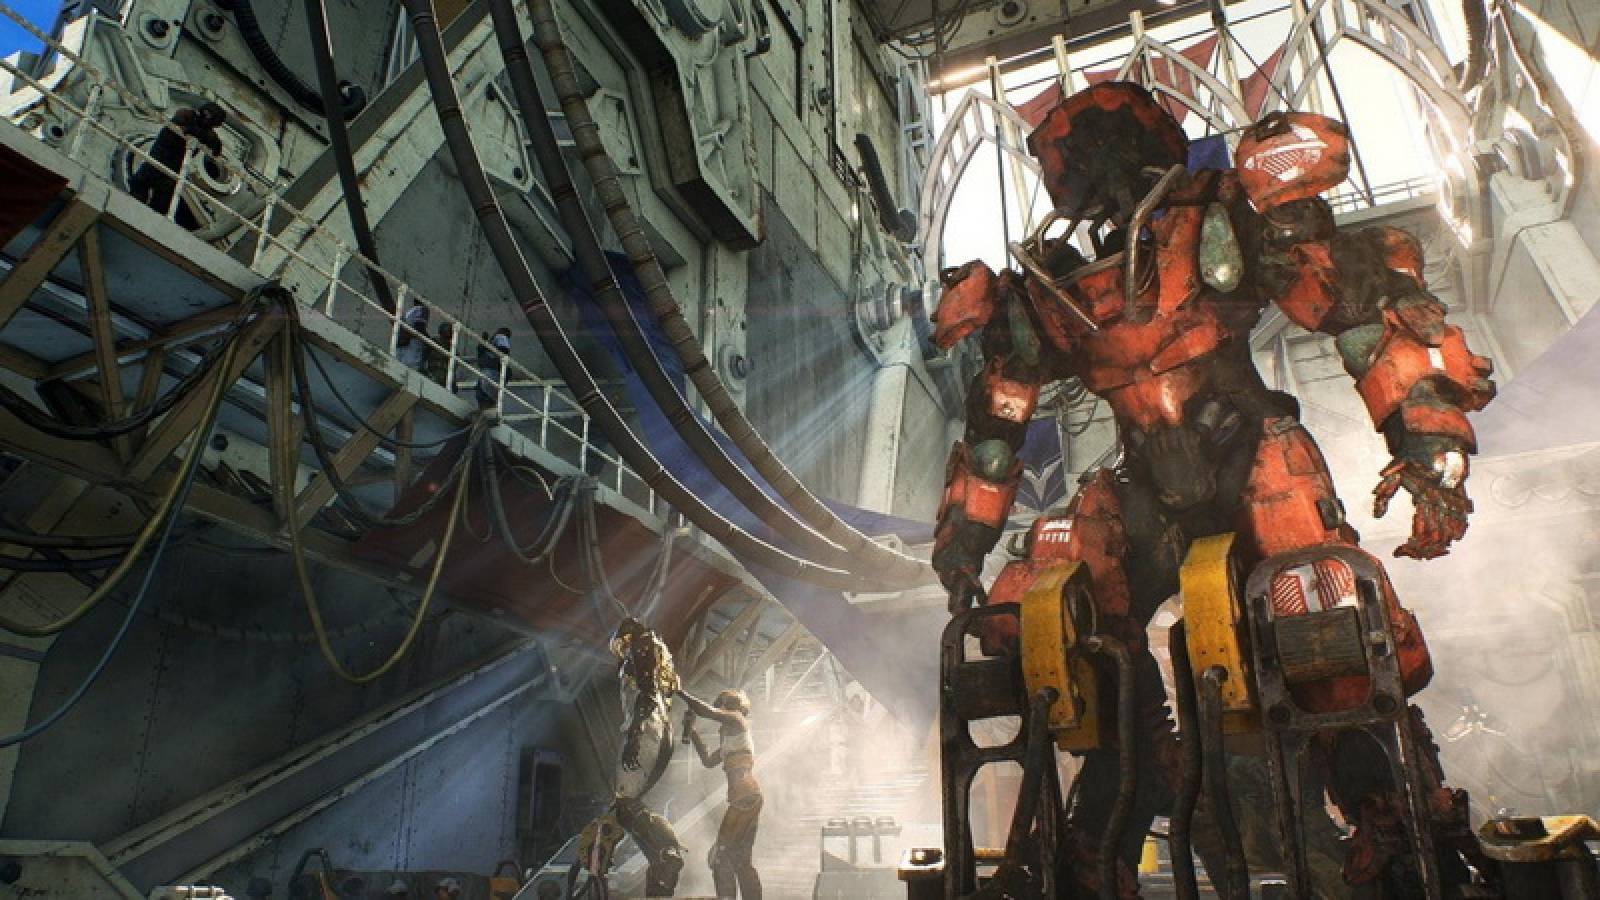 Hey BioWare, why doesn't Anthem learn anything from its predecessors?